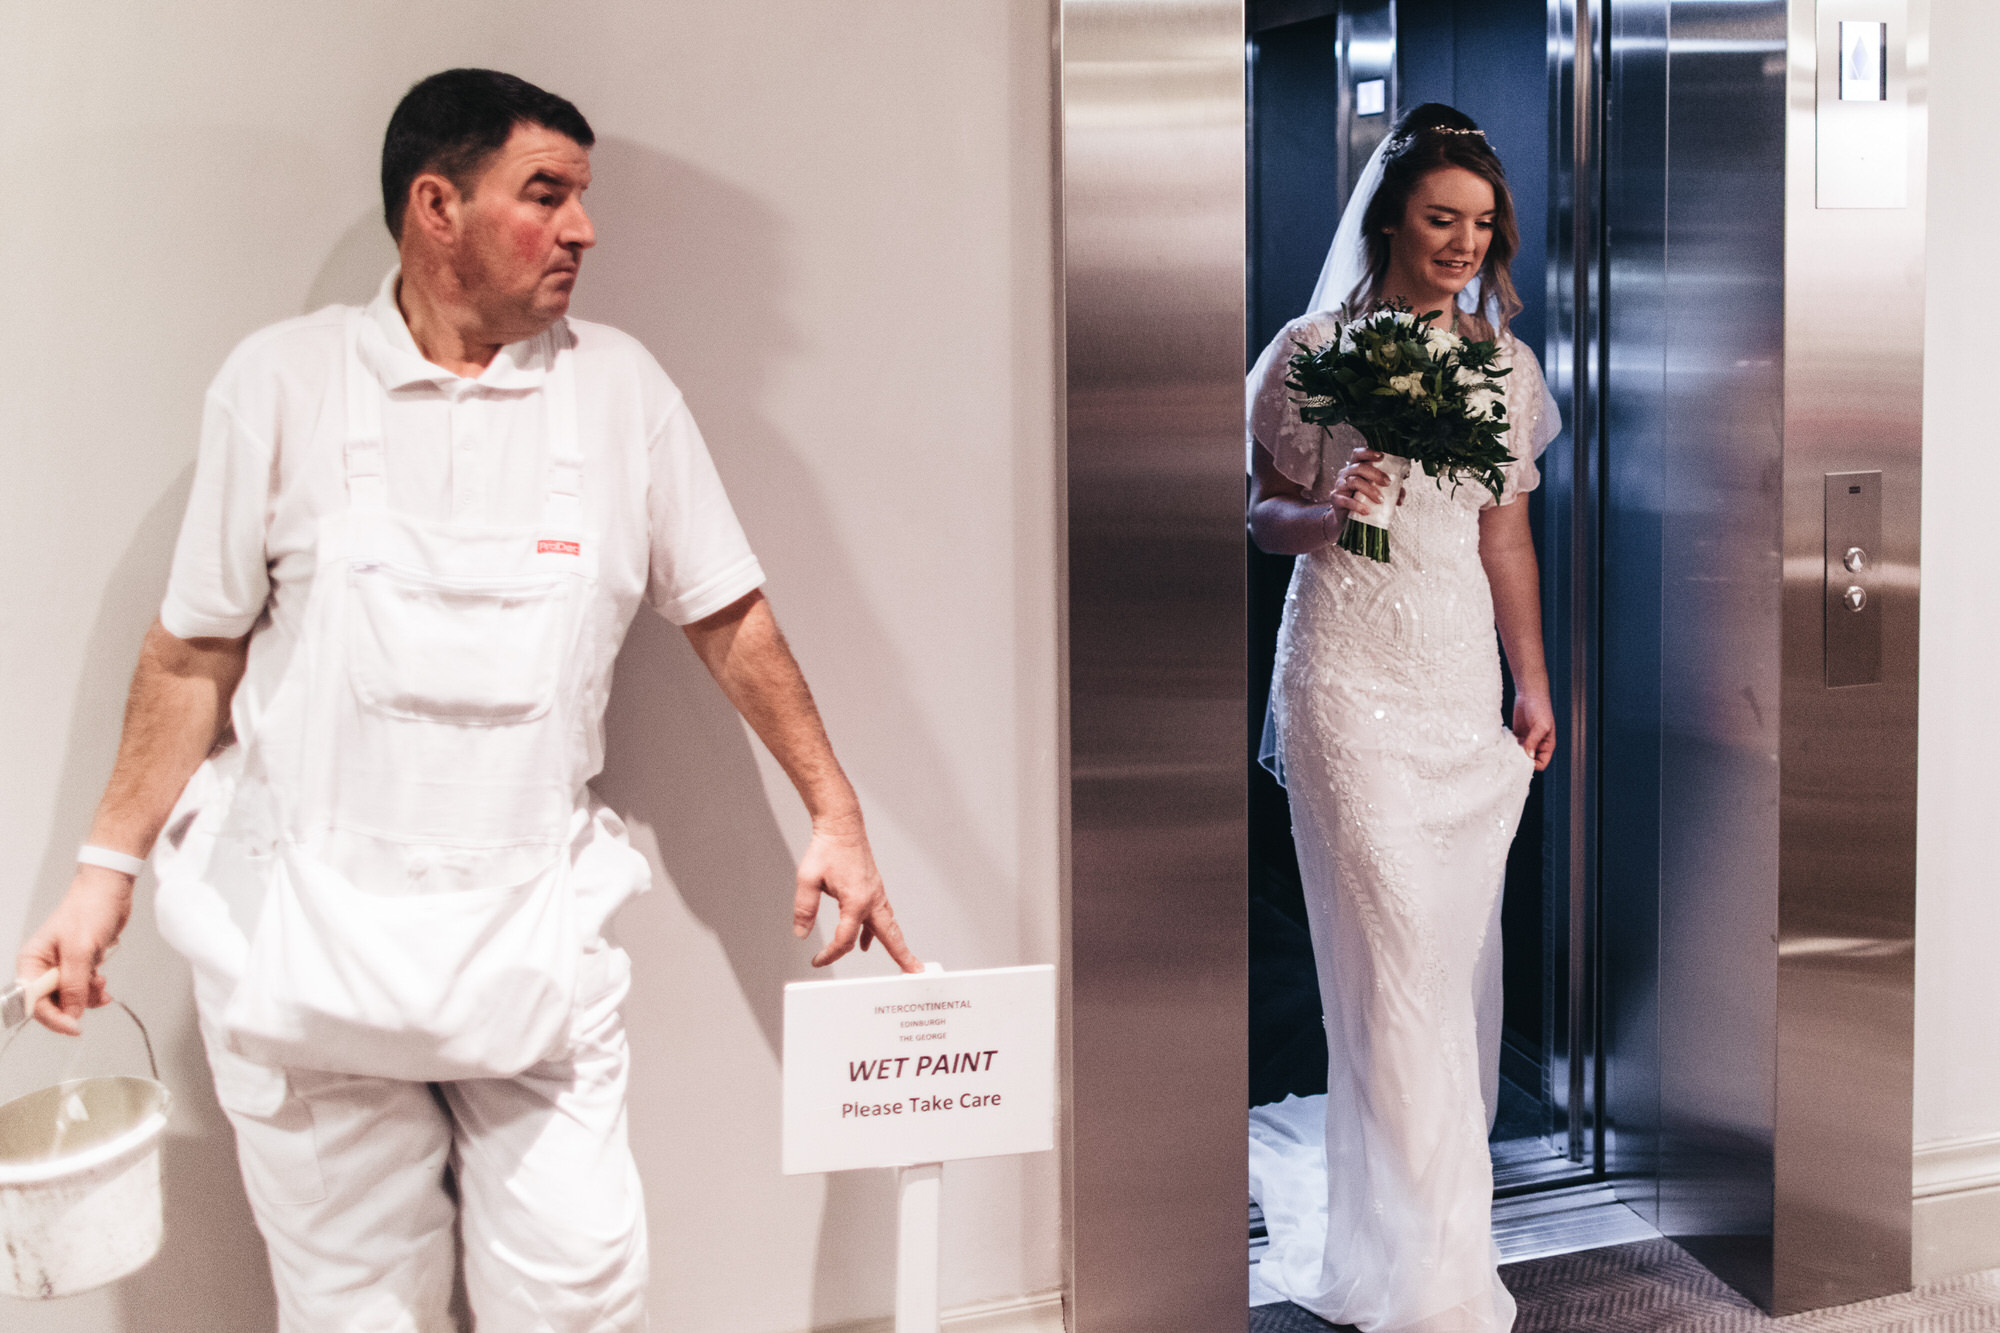 bride comes out of lift and decorator is holding paint pointing to wet paint sign in humorous moment